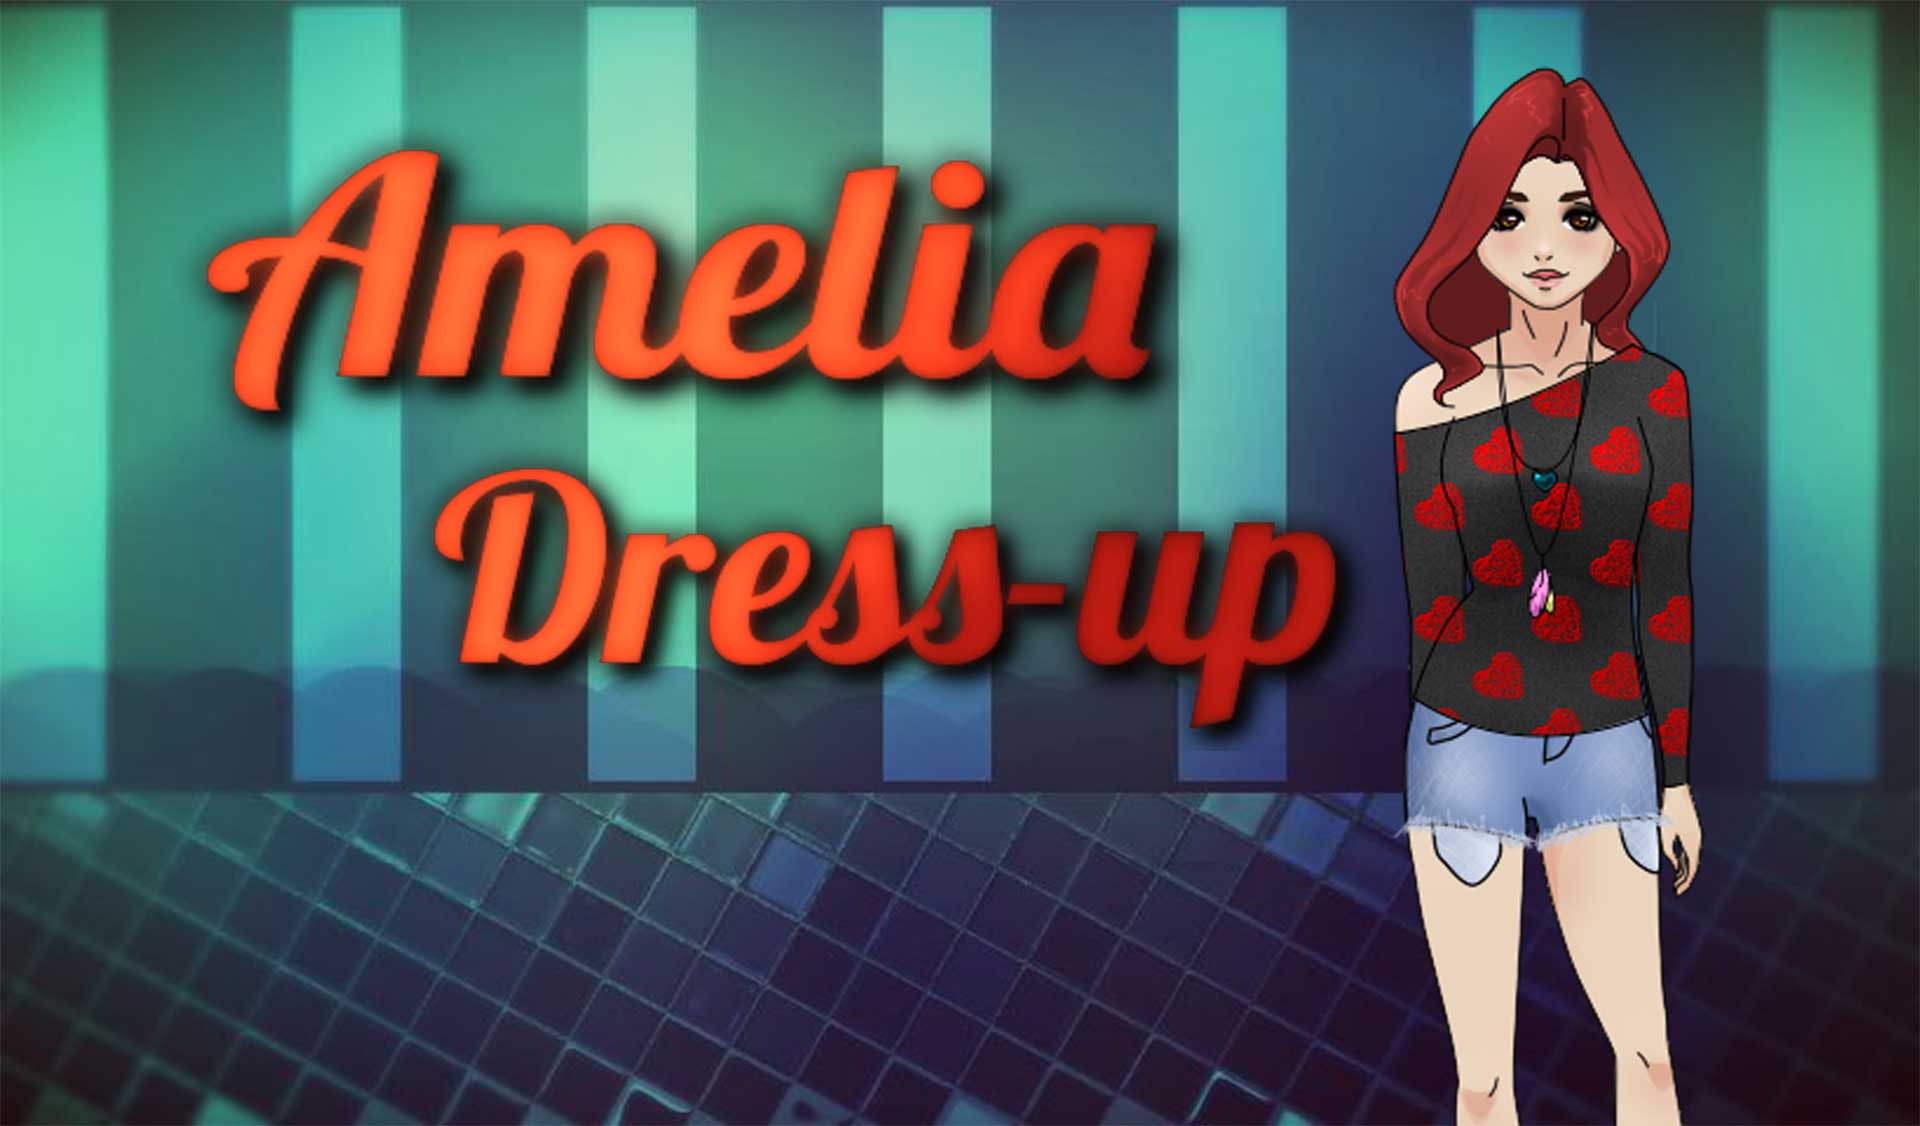 Amelia Dress-Up Game - www.wootgames.com